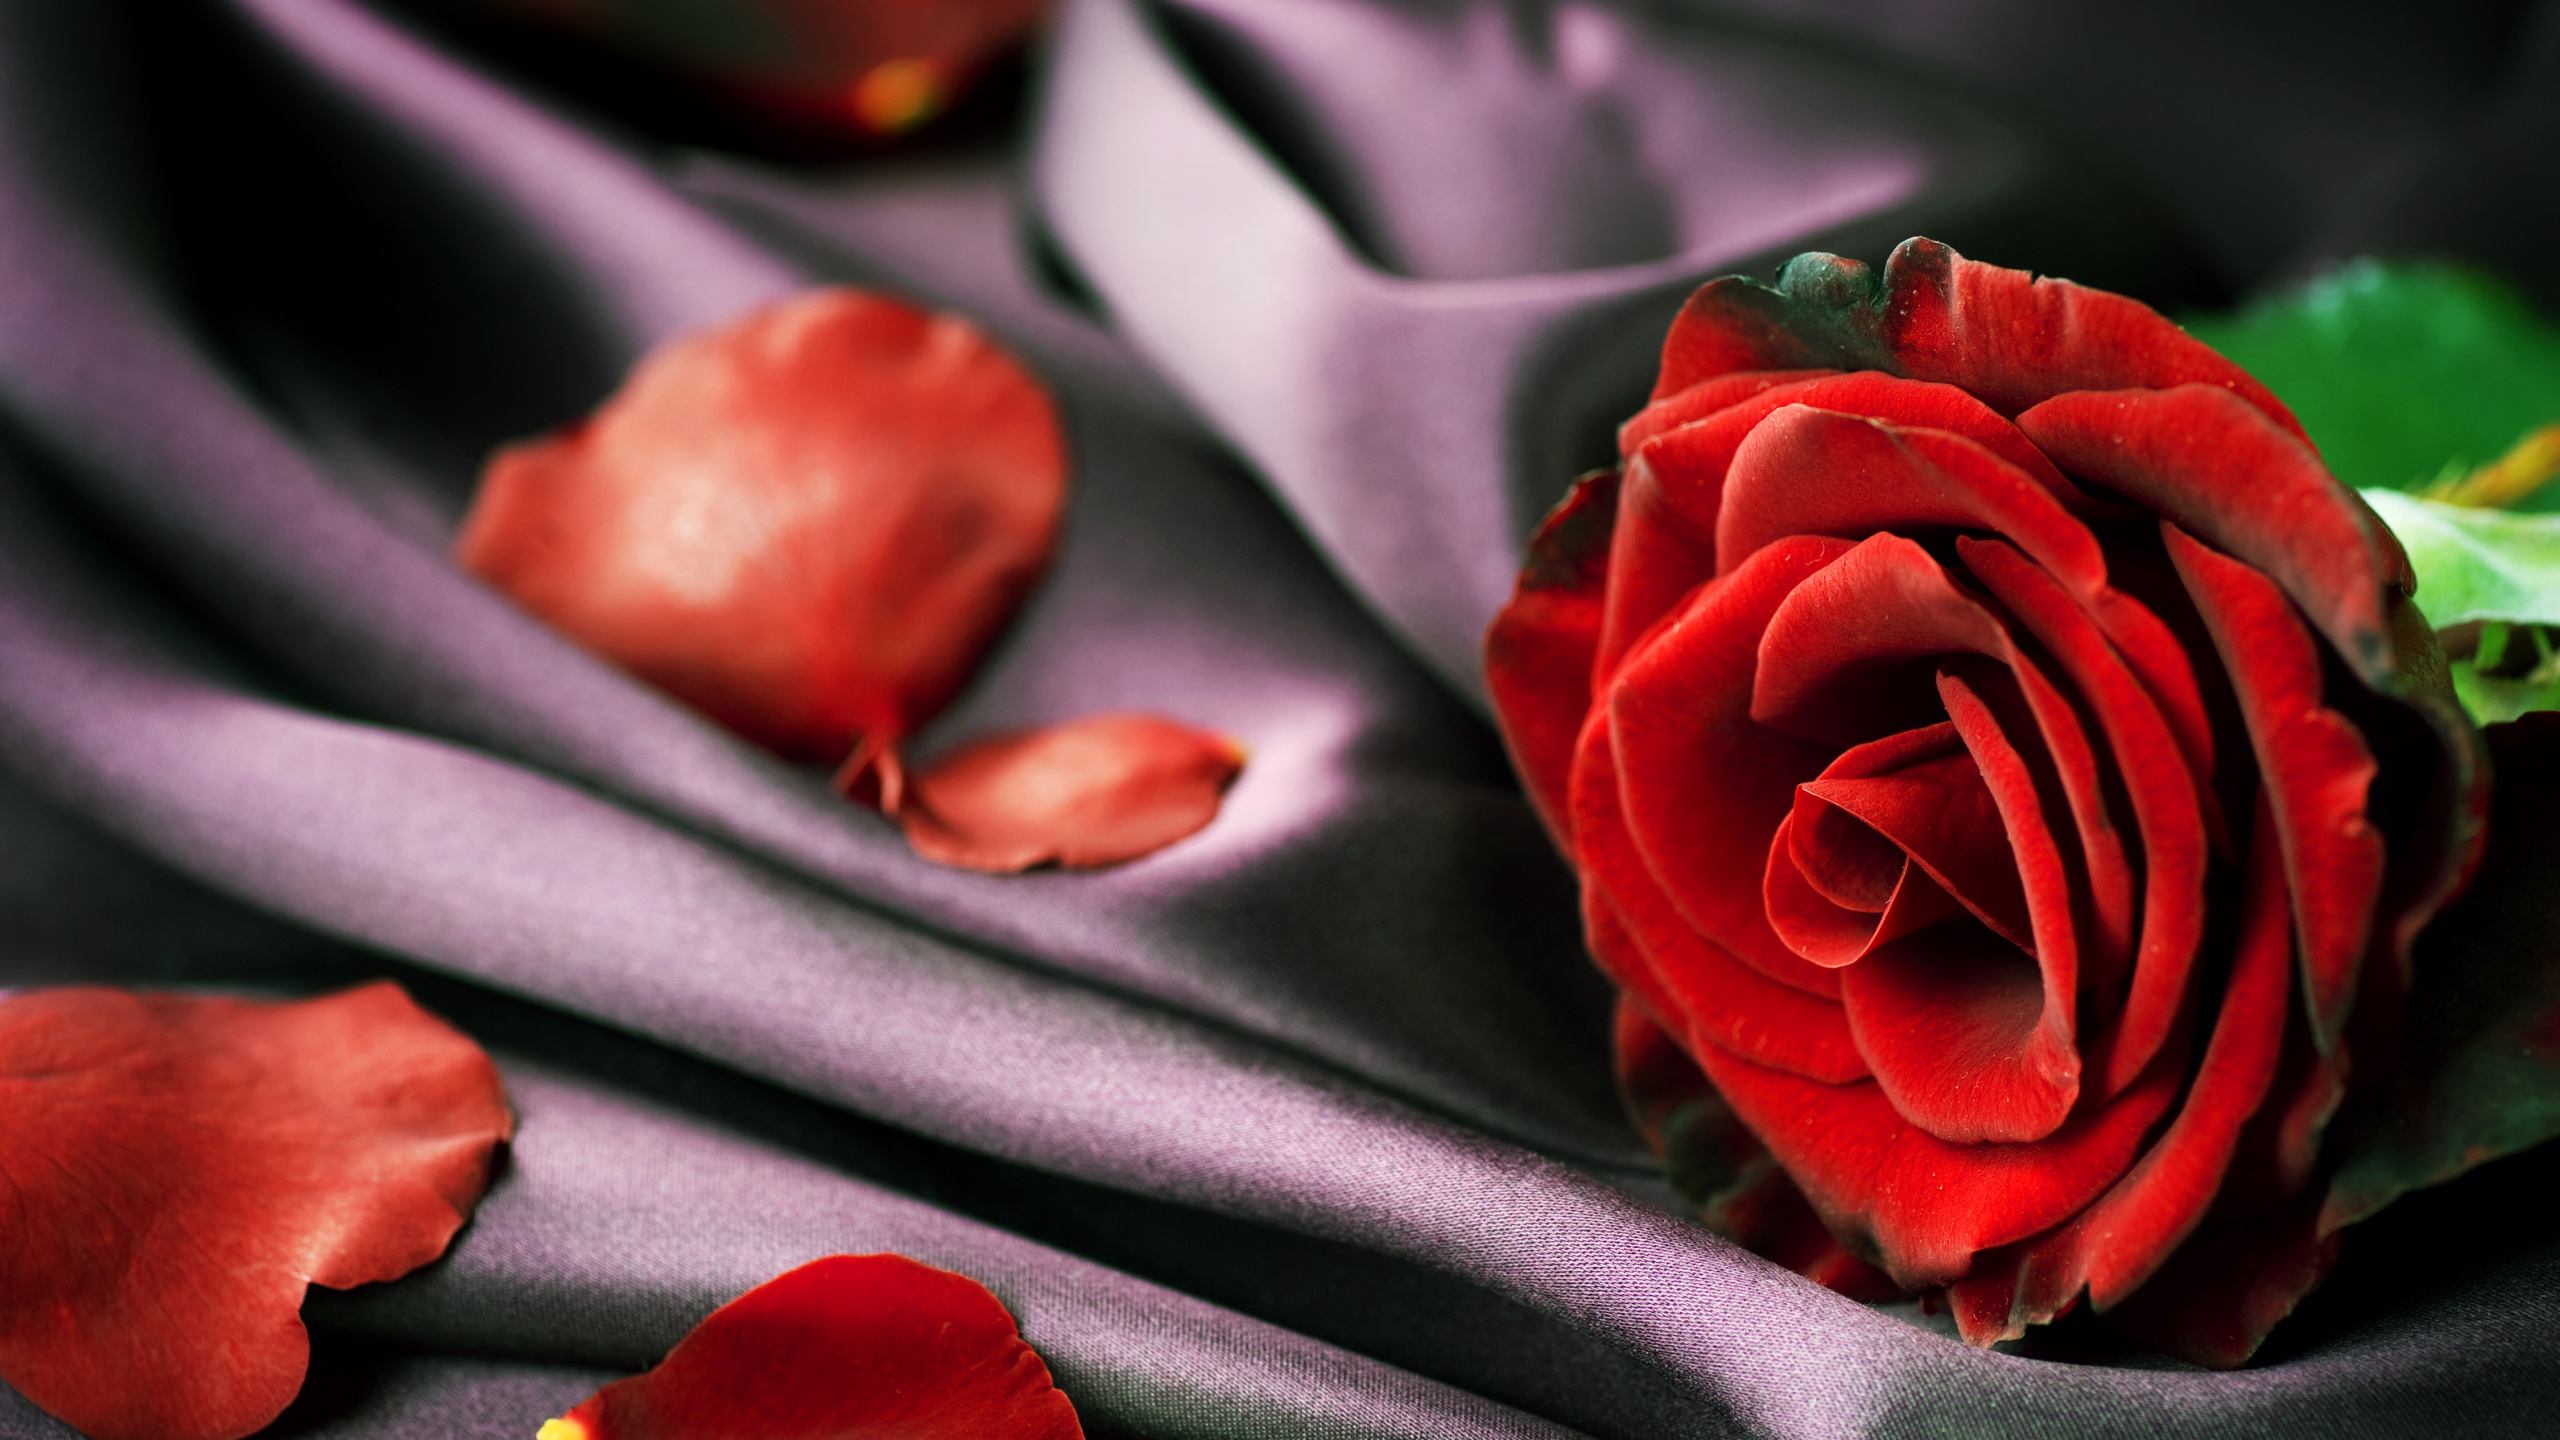 Red Rose on Gray Textile. Wallpaper in 2560x1440 Resolution